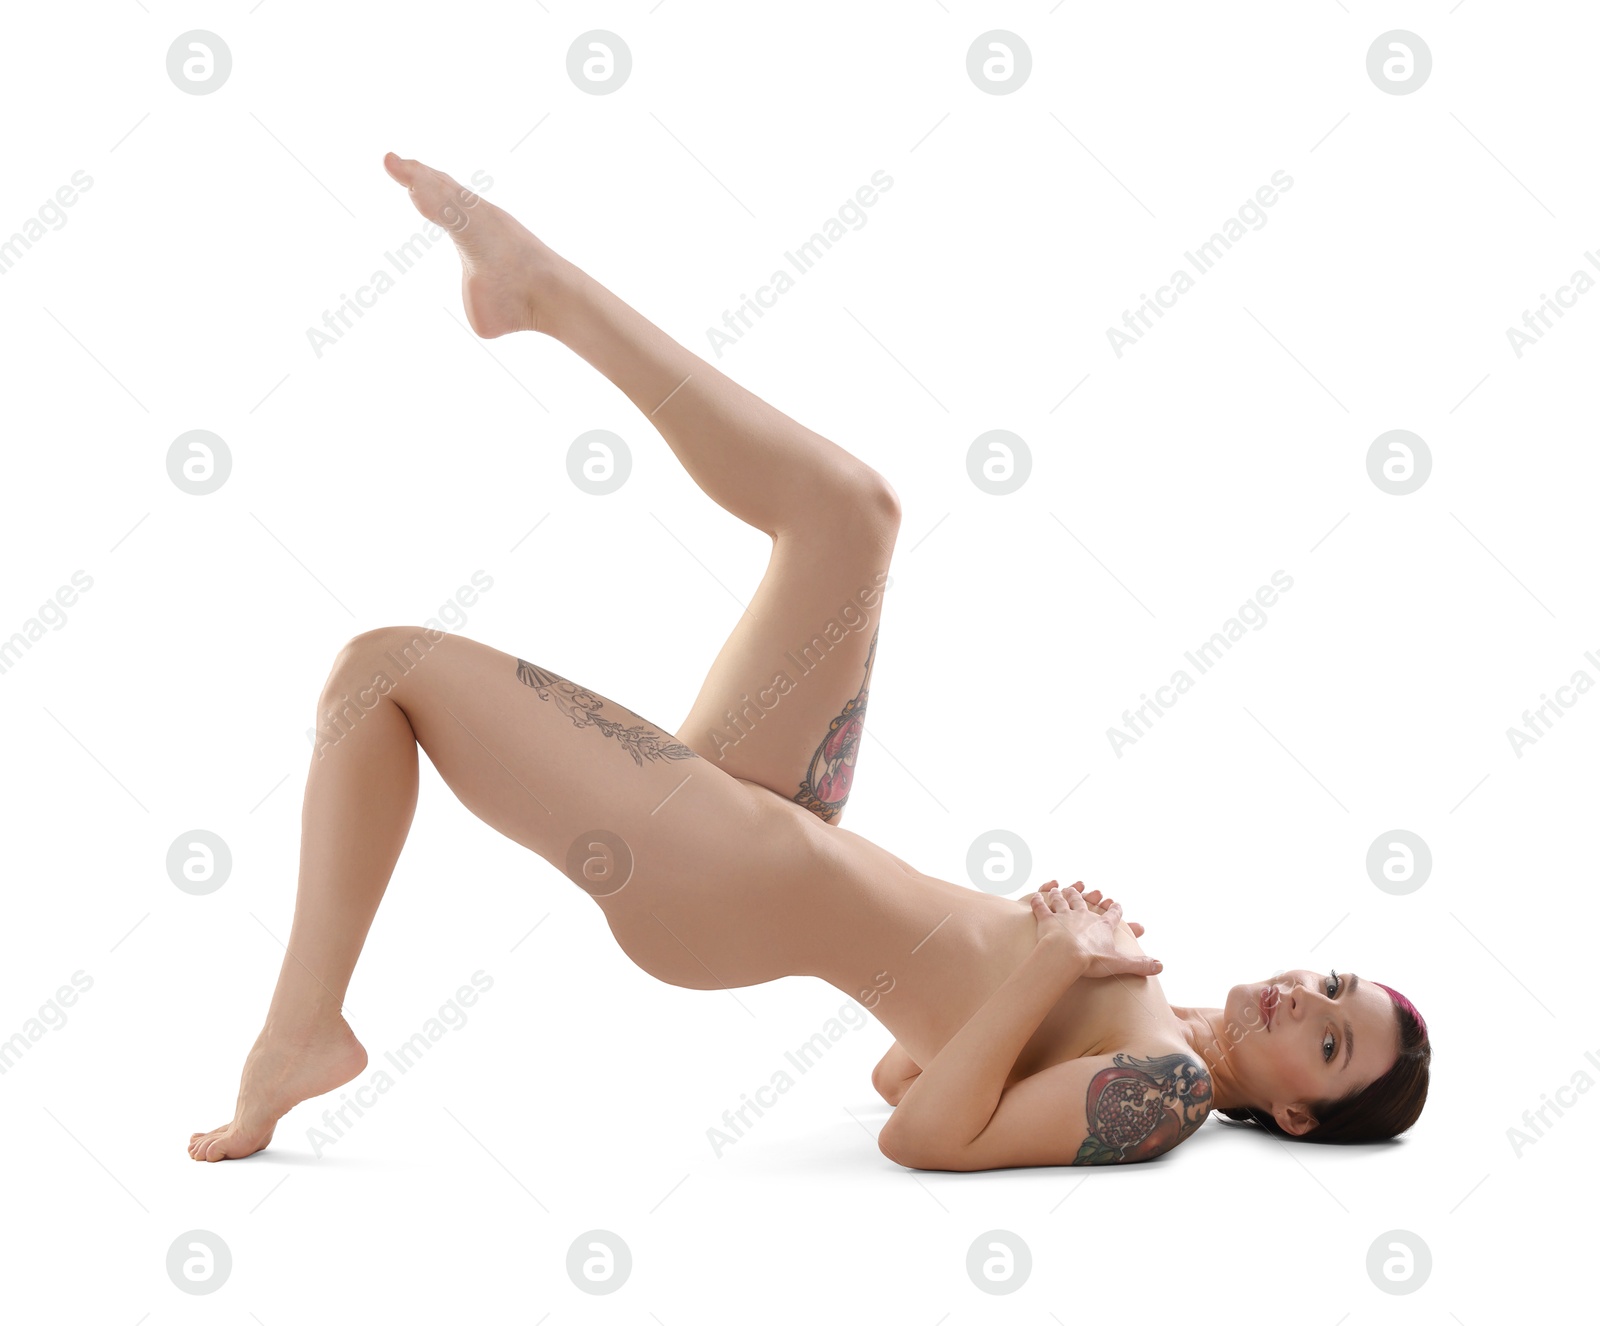 Photo of Beautiful nude woman with tattoos posing on white background